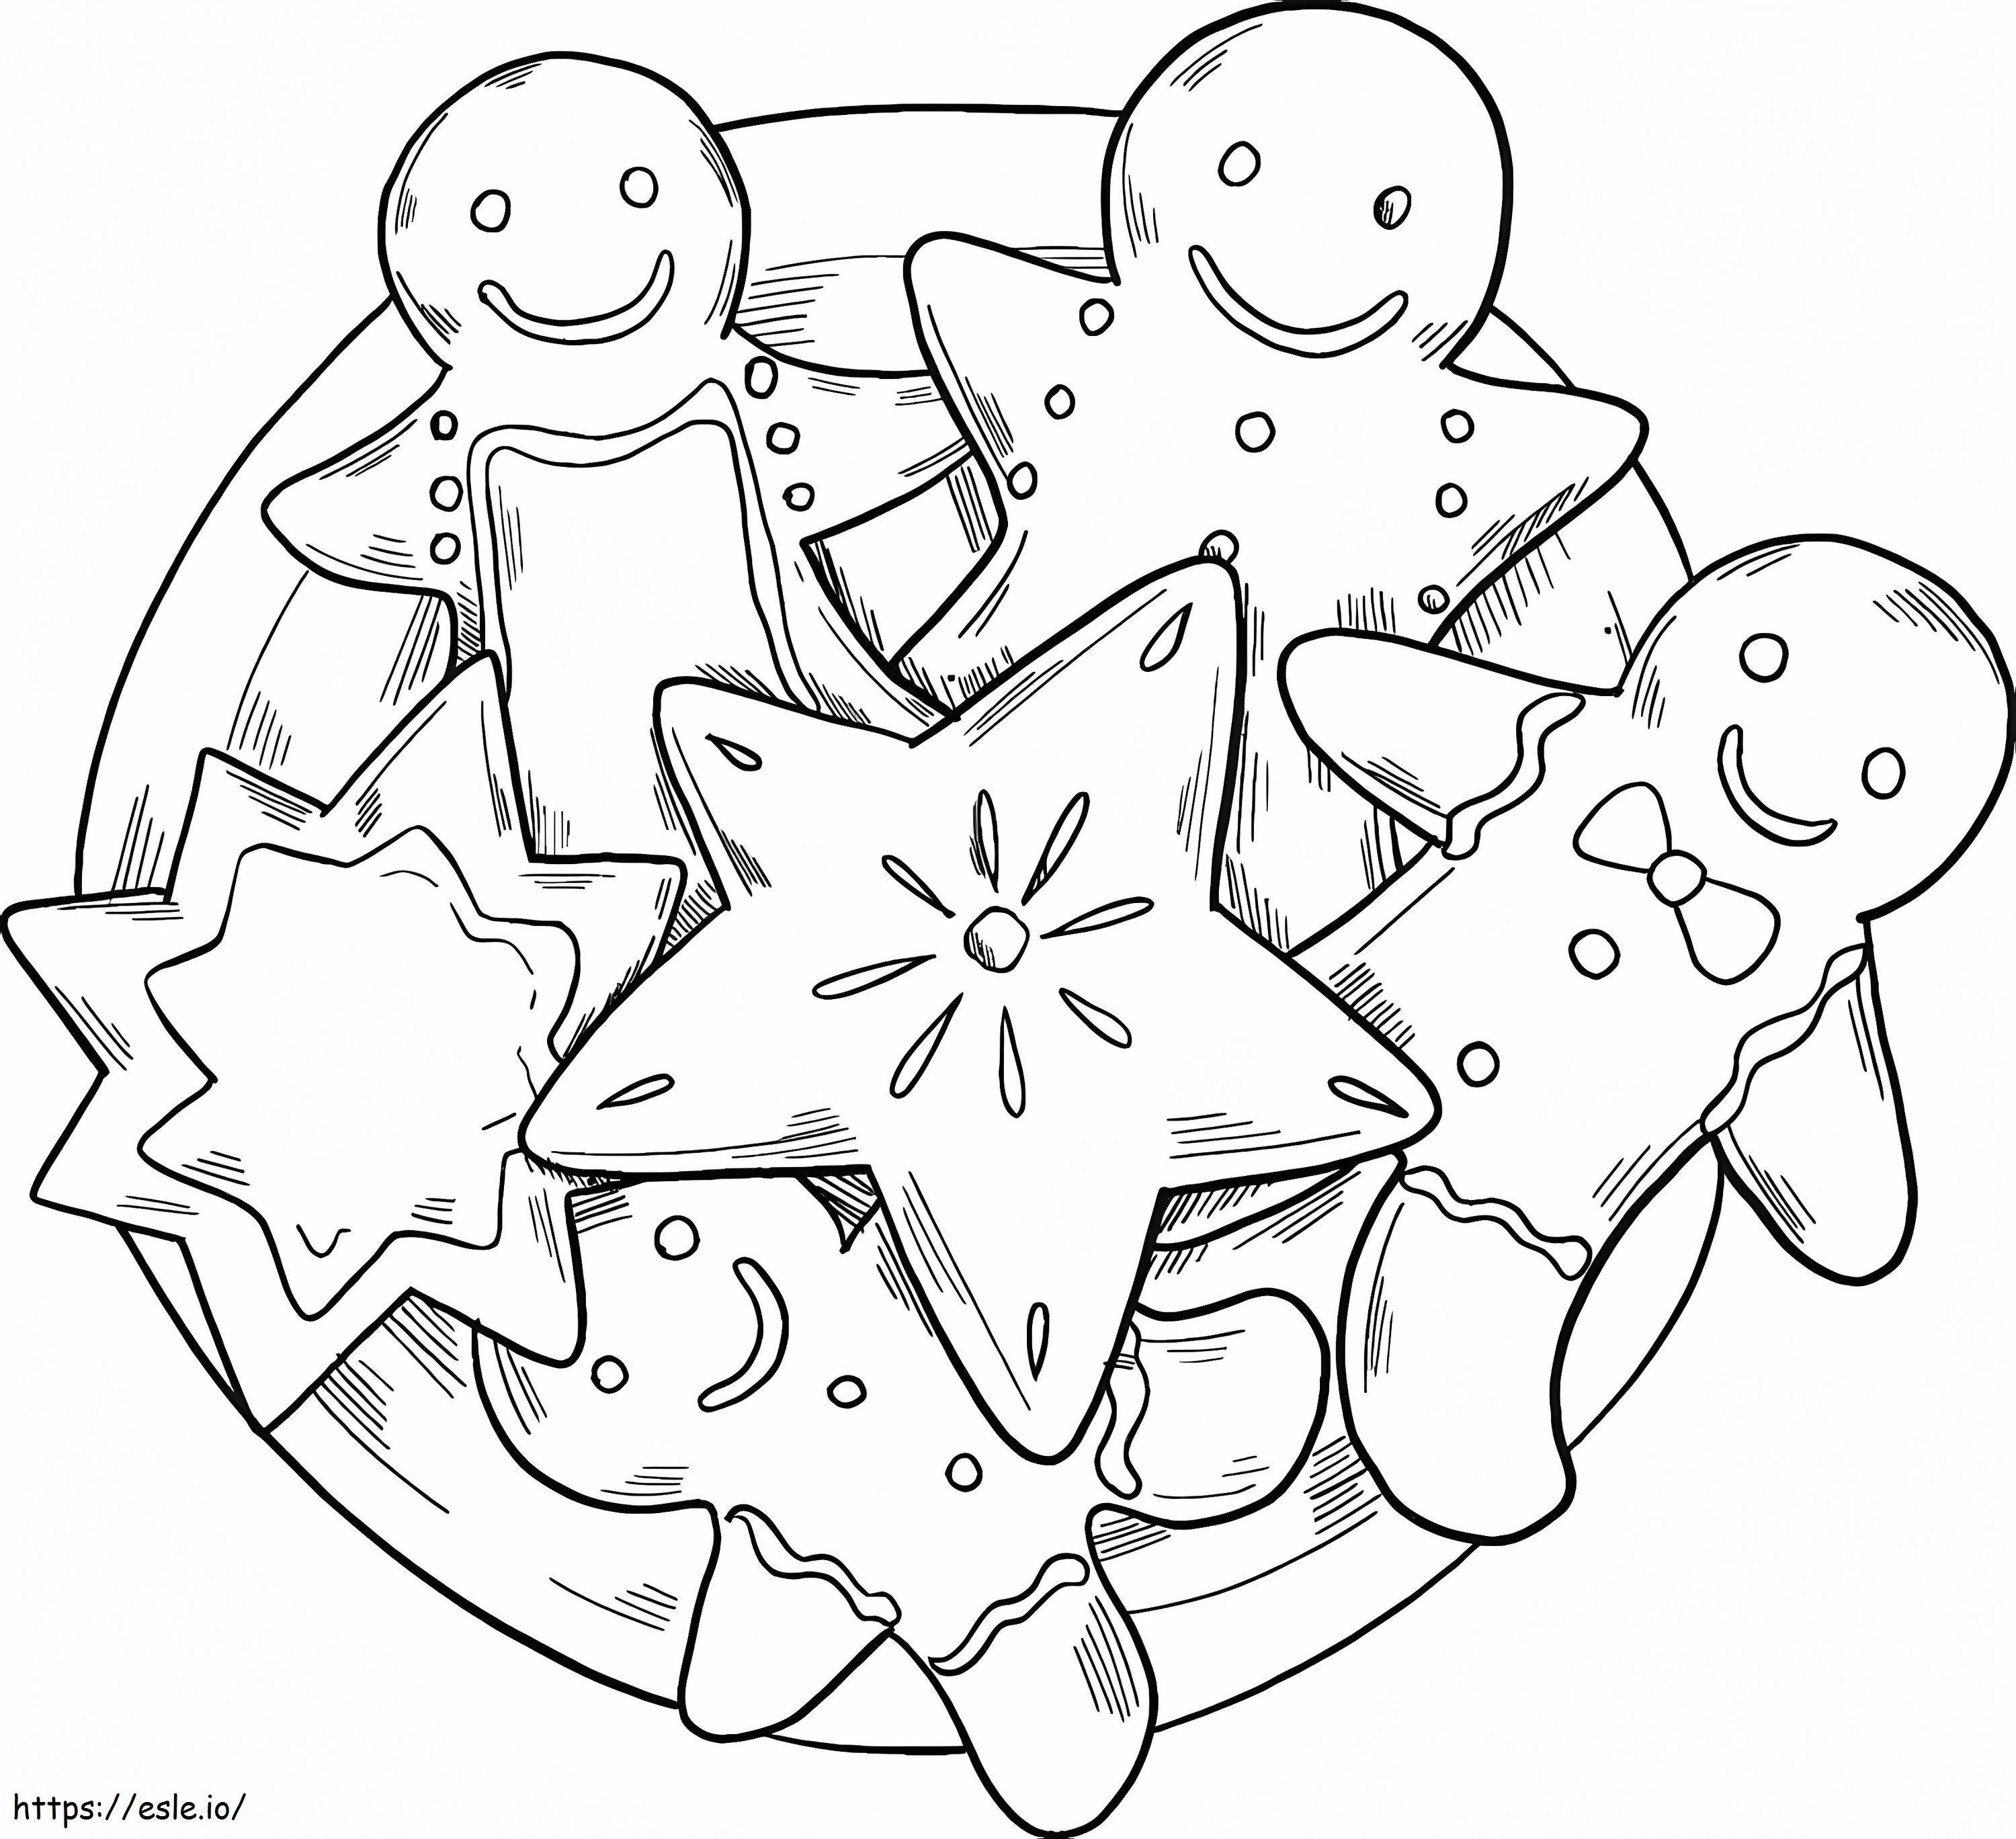 Eating Cookies On Plate coloring page